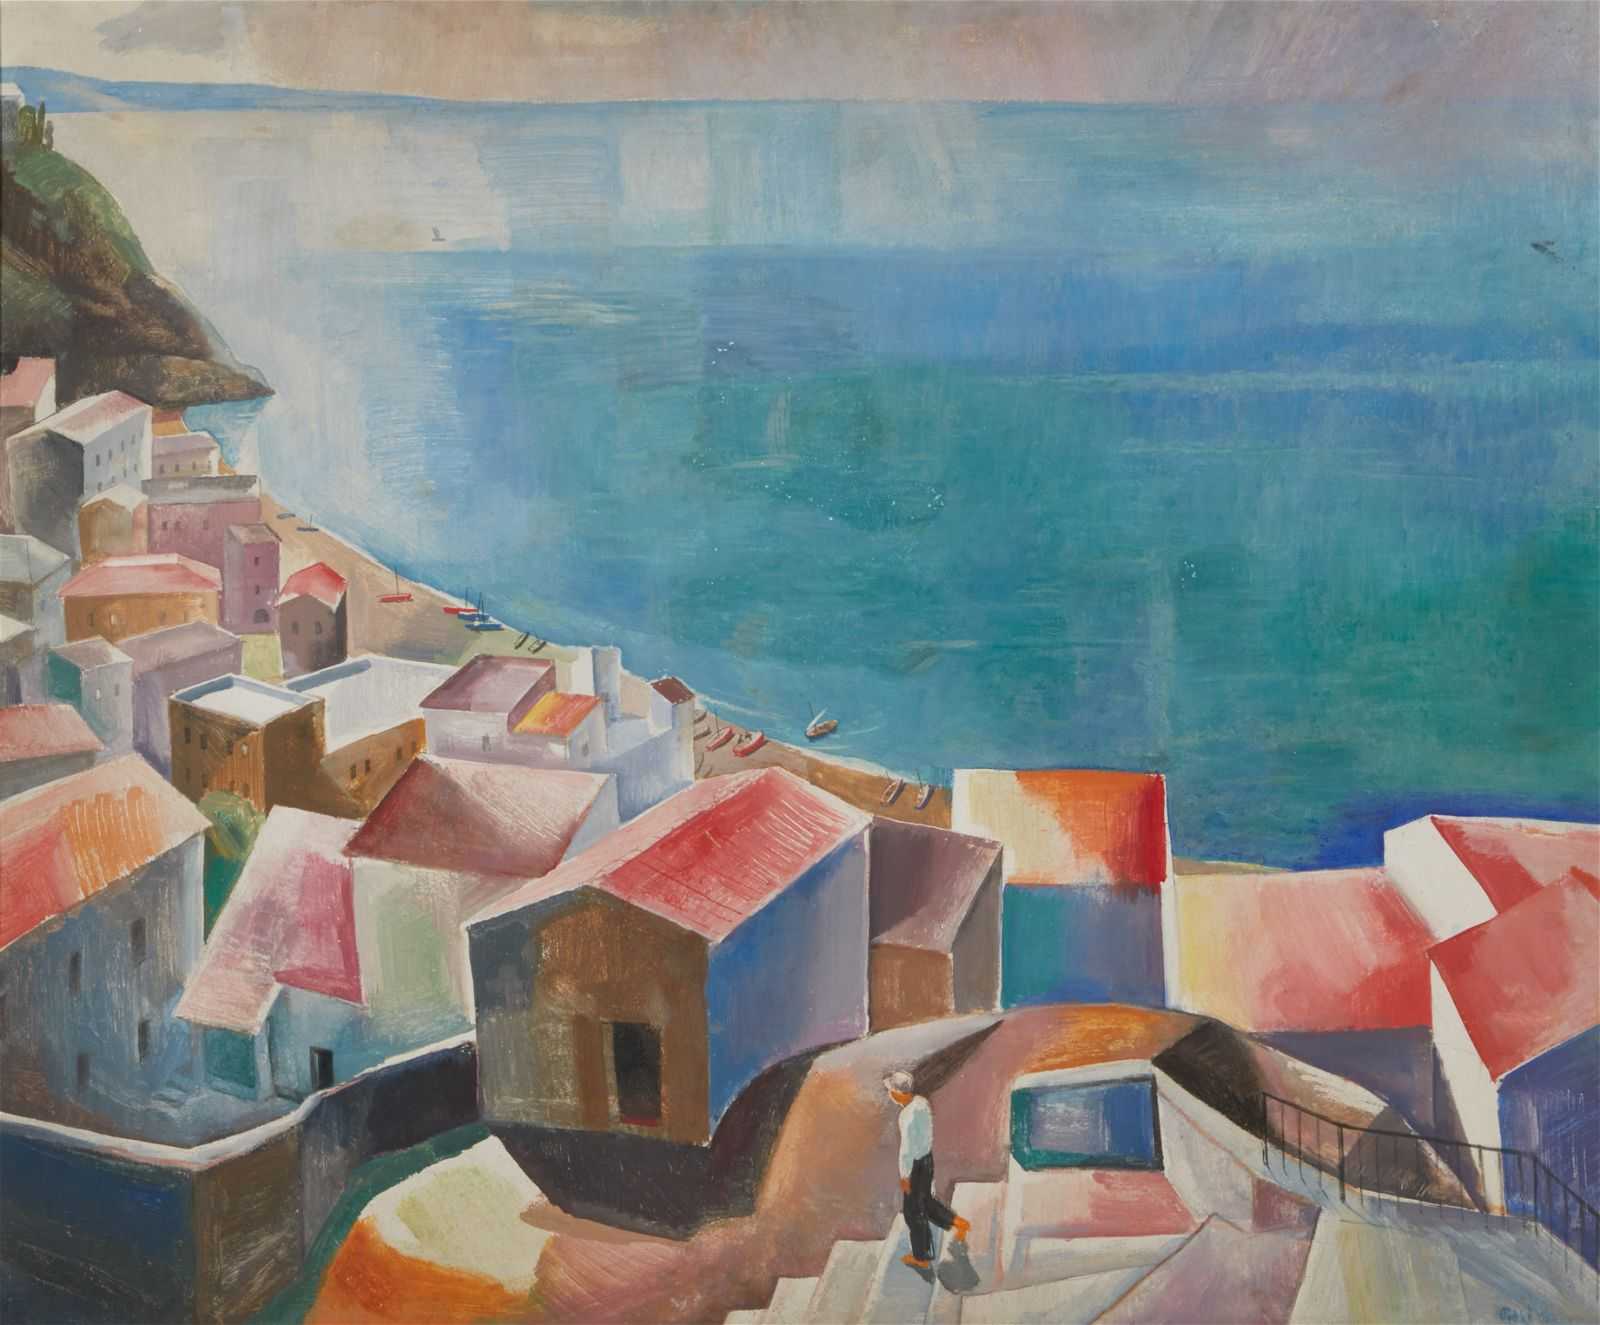 Károly Patkó&#8217;s ‘Cetara, Italy’ leads our five auction highlights